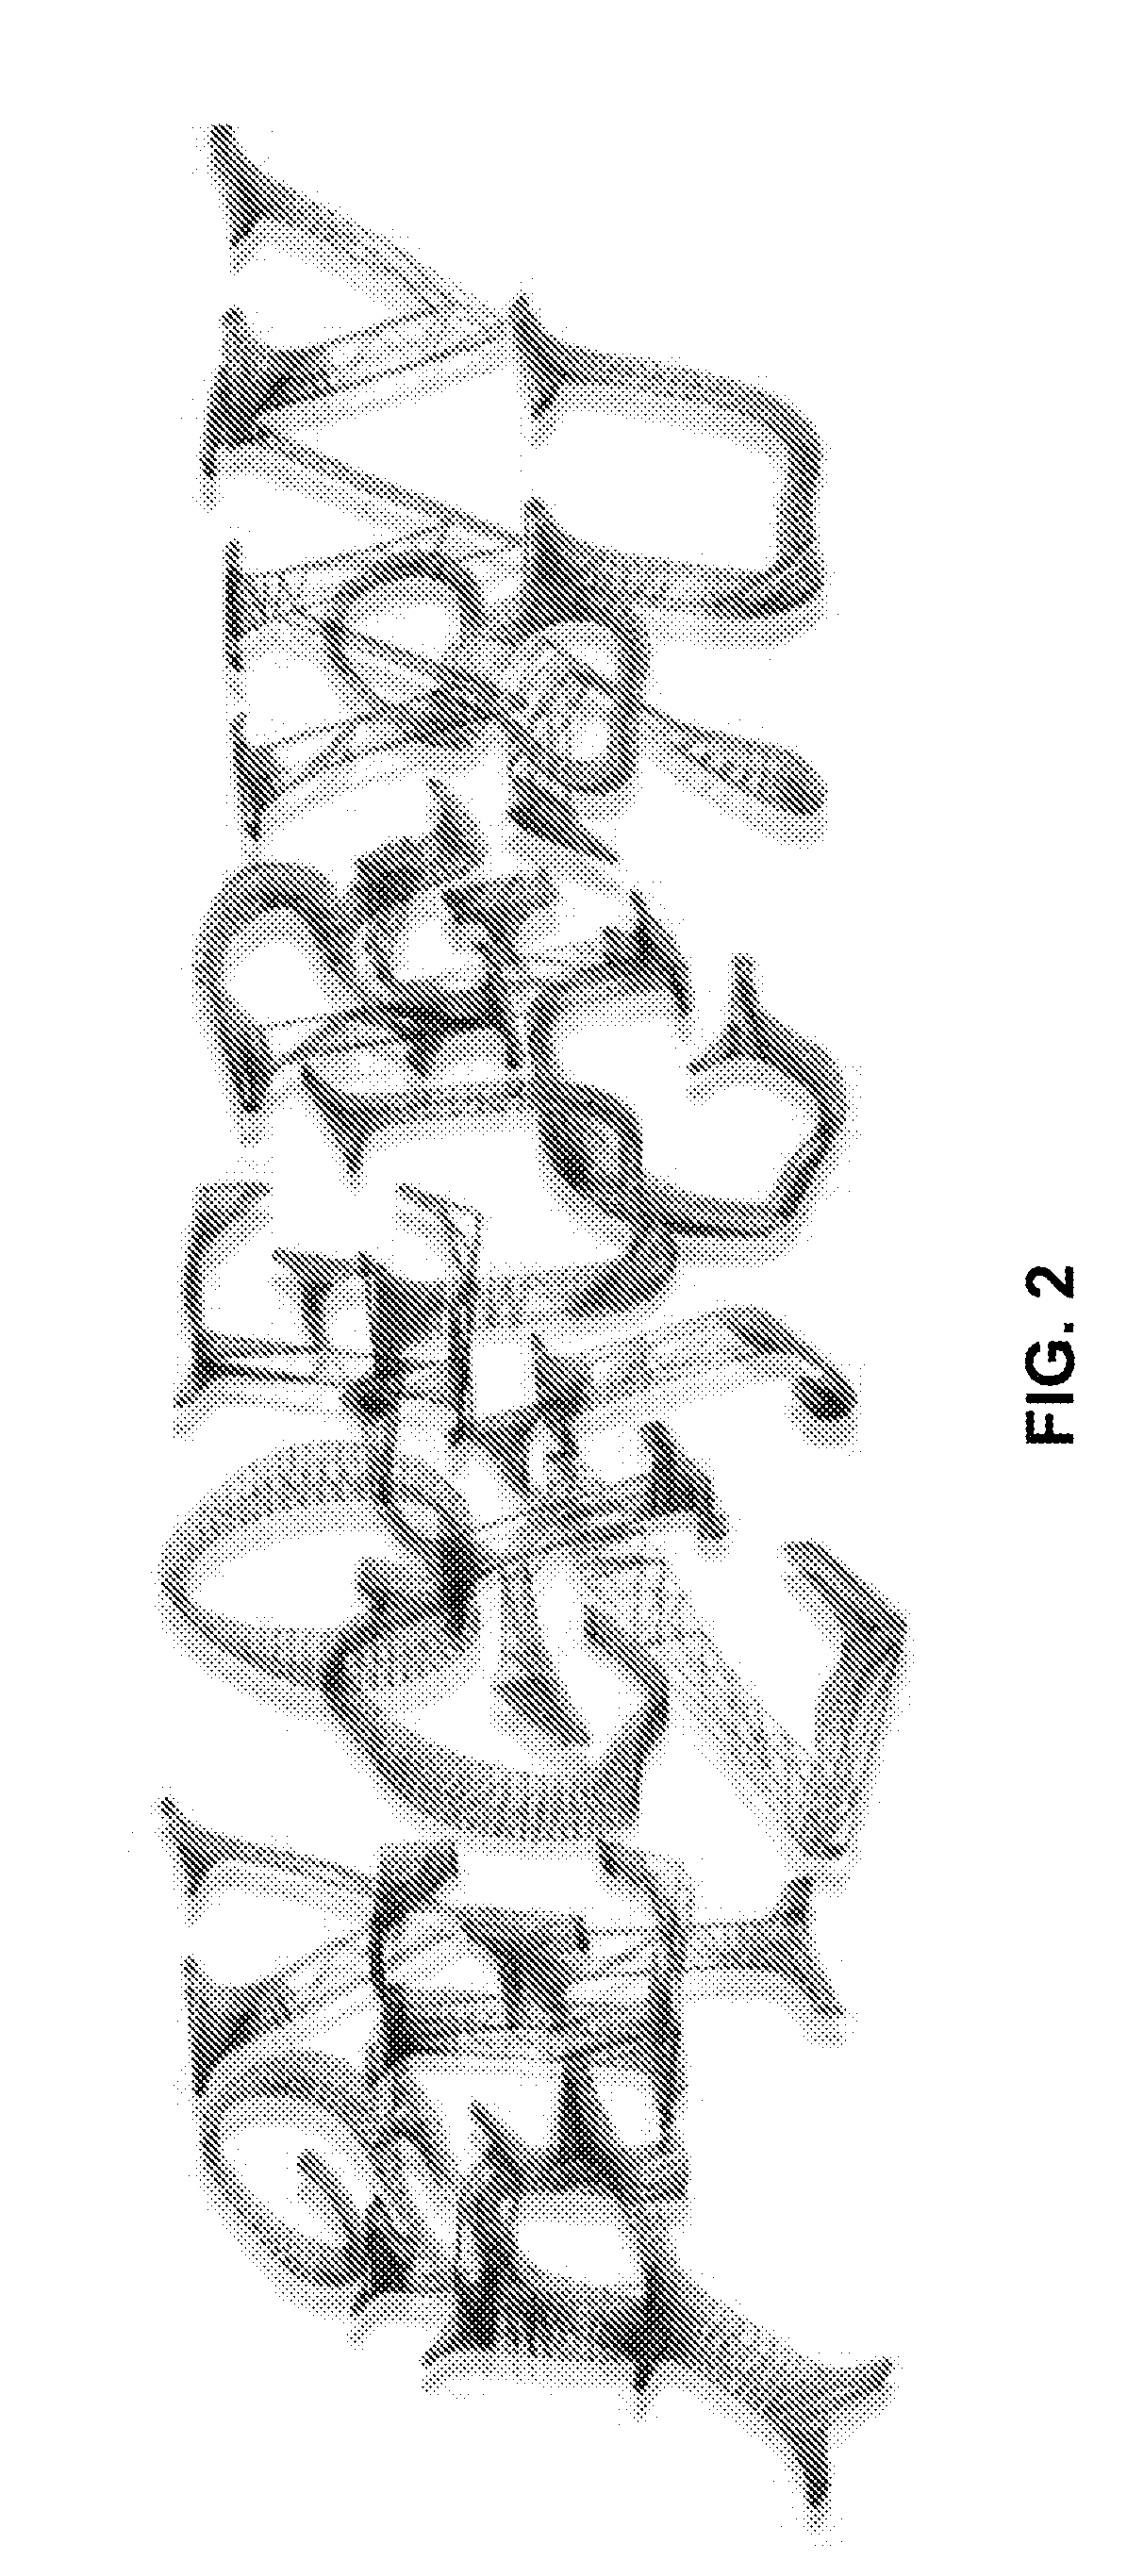 Multi Dimensional CAPTCHA System and Method